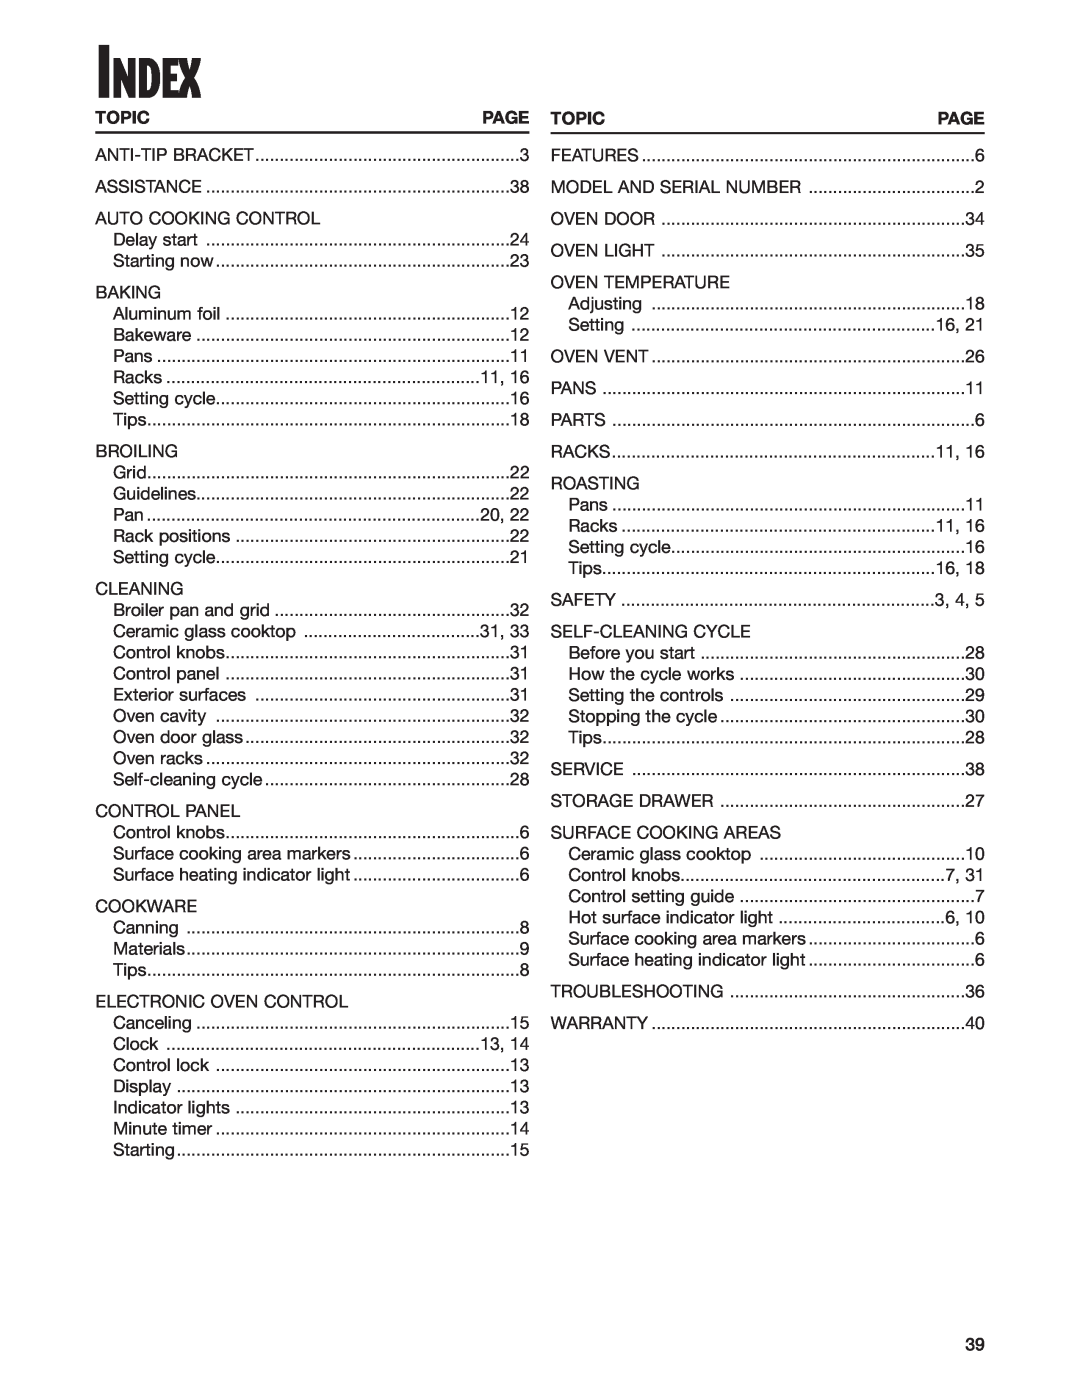 Whirlpool SES374H warranty Index, Topic, Page 